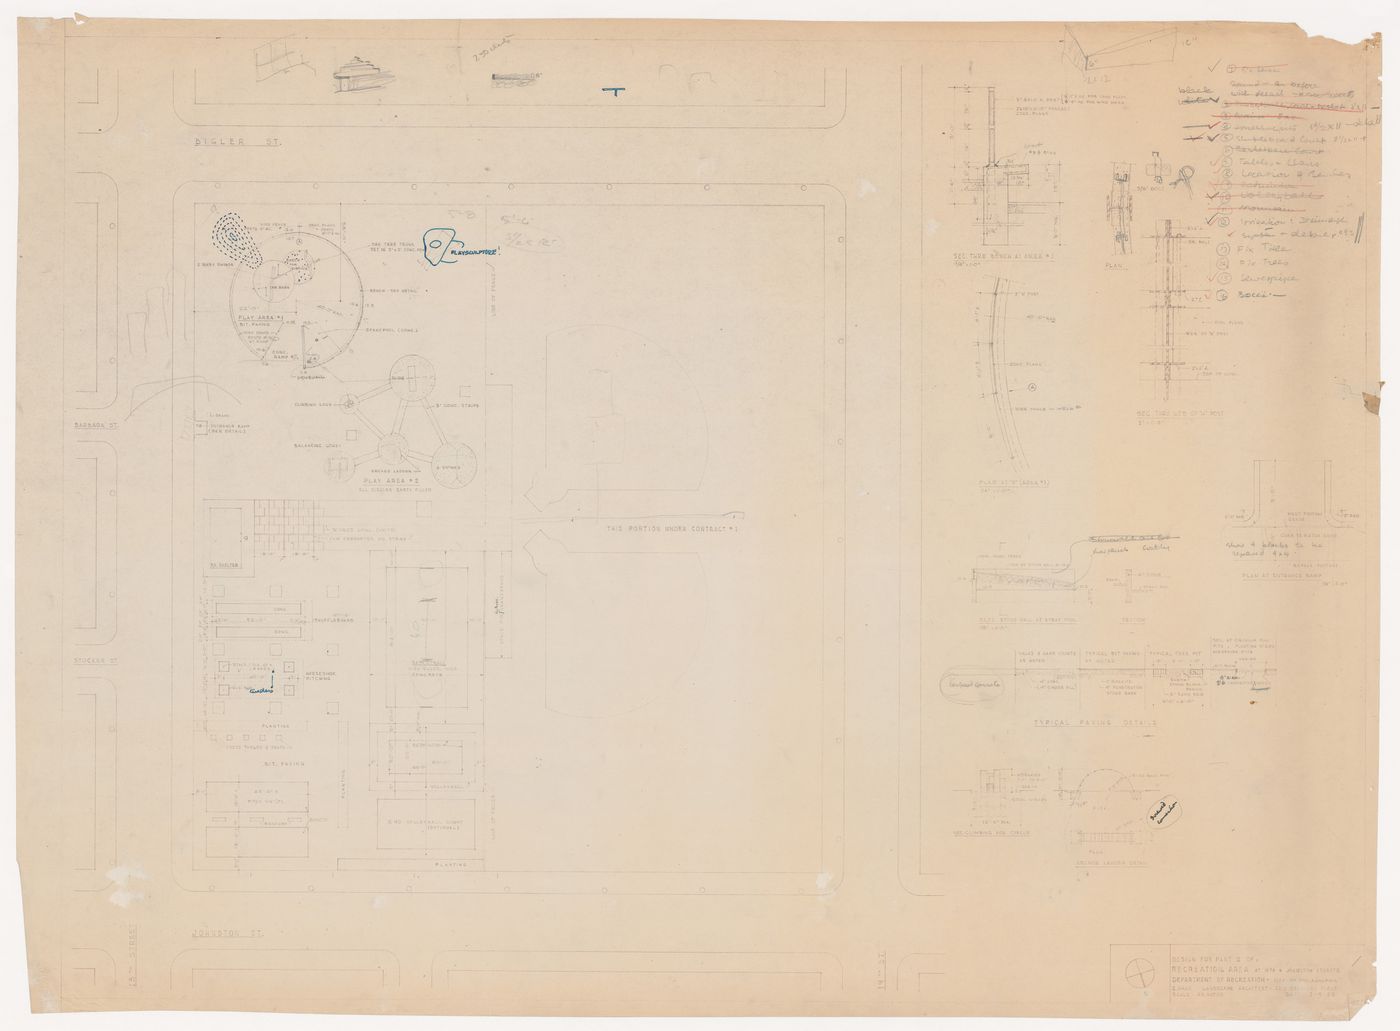 Site plan with details and notes for recreational area at 18th and Bigler Streets, Philadelphia, Pennsylvania